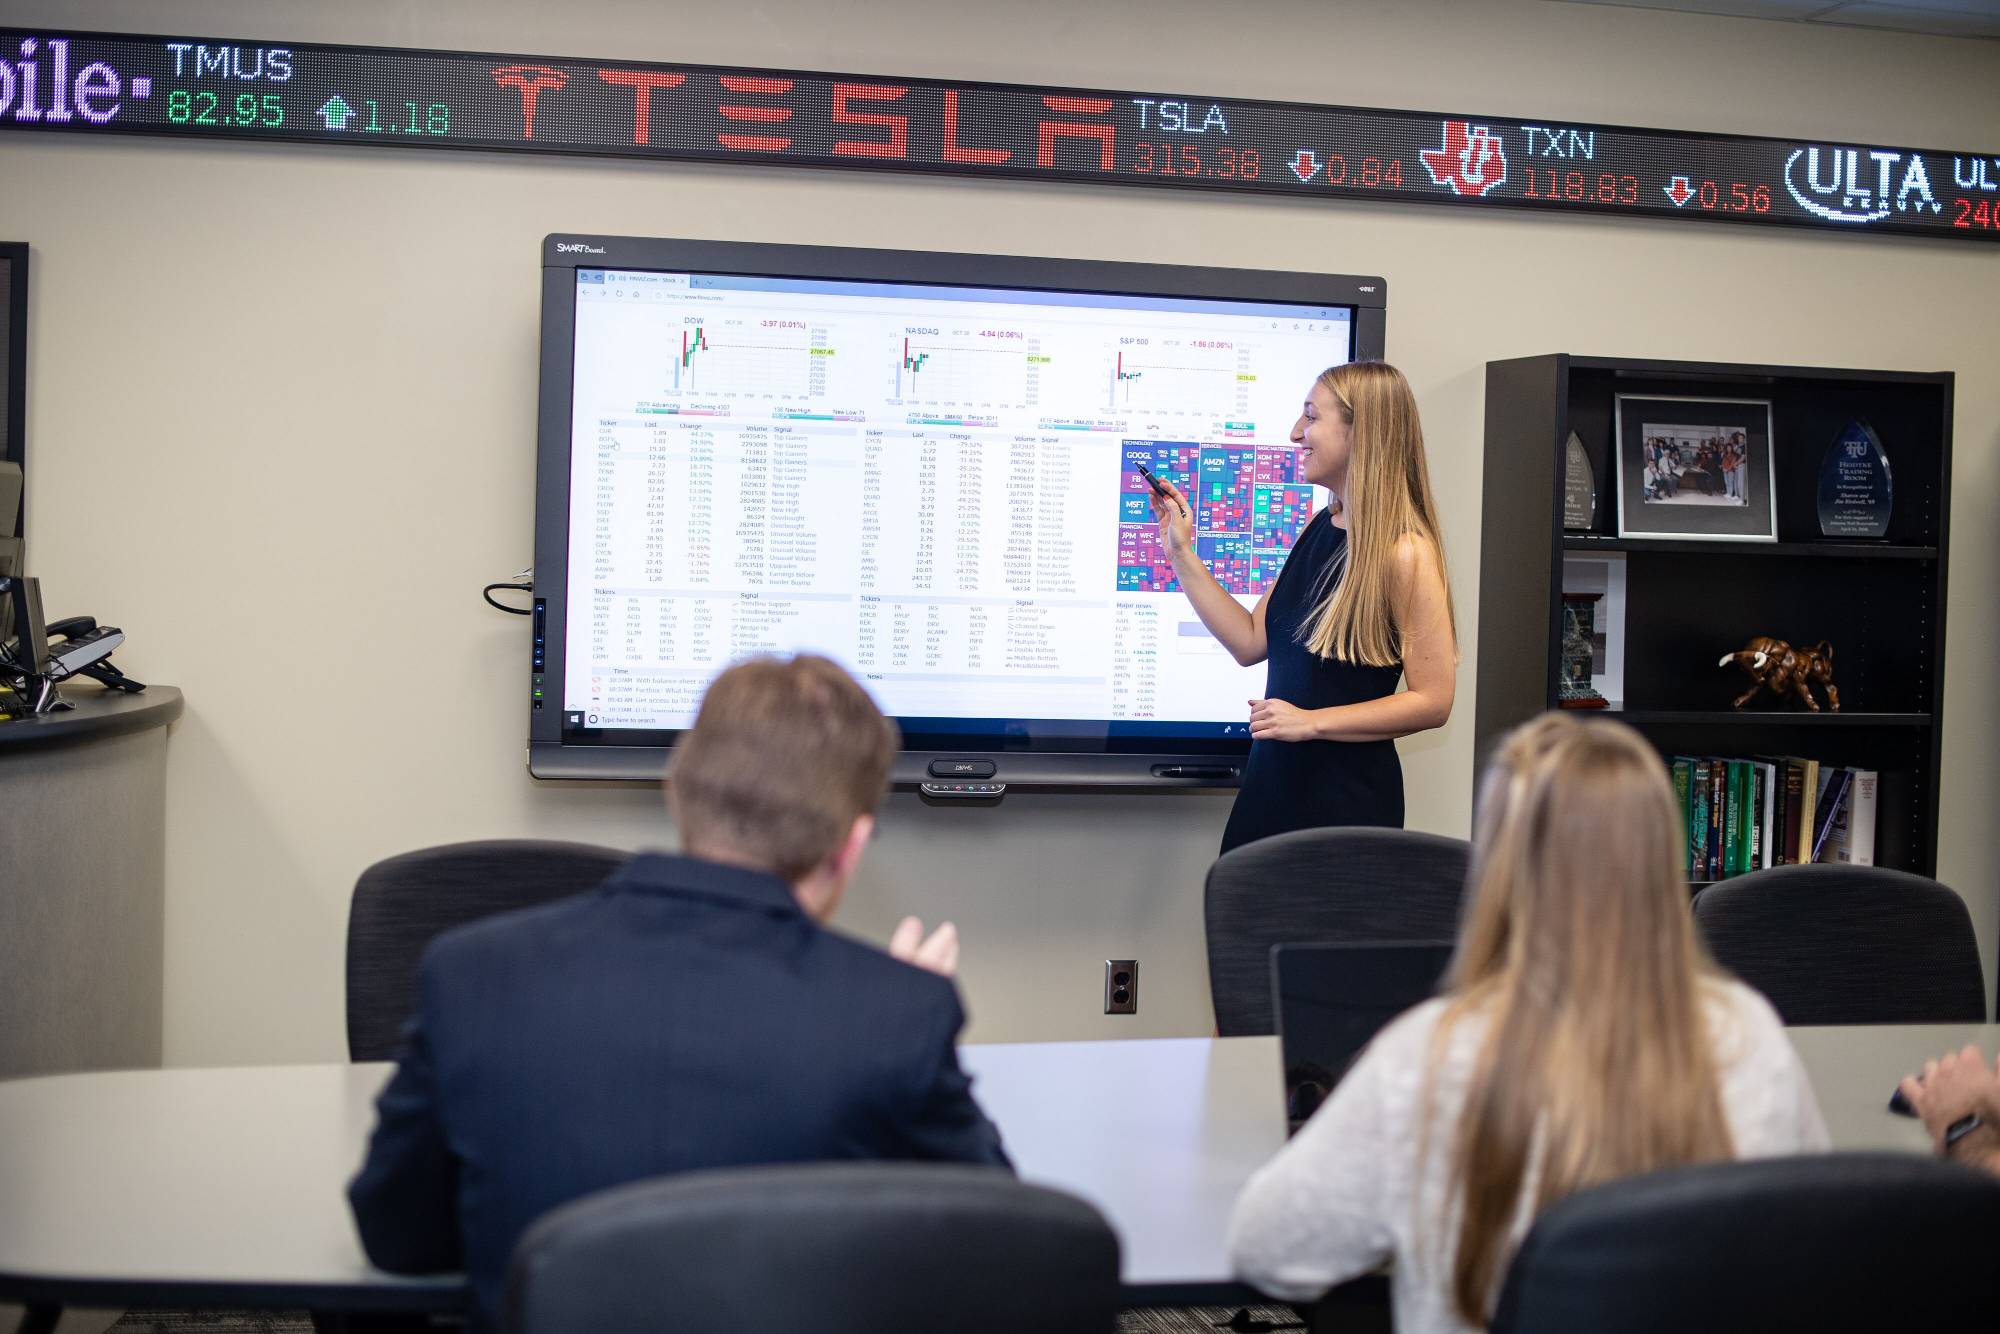 female student giving a presentation in front of a large interactive screen